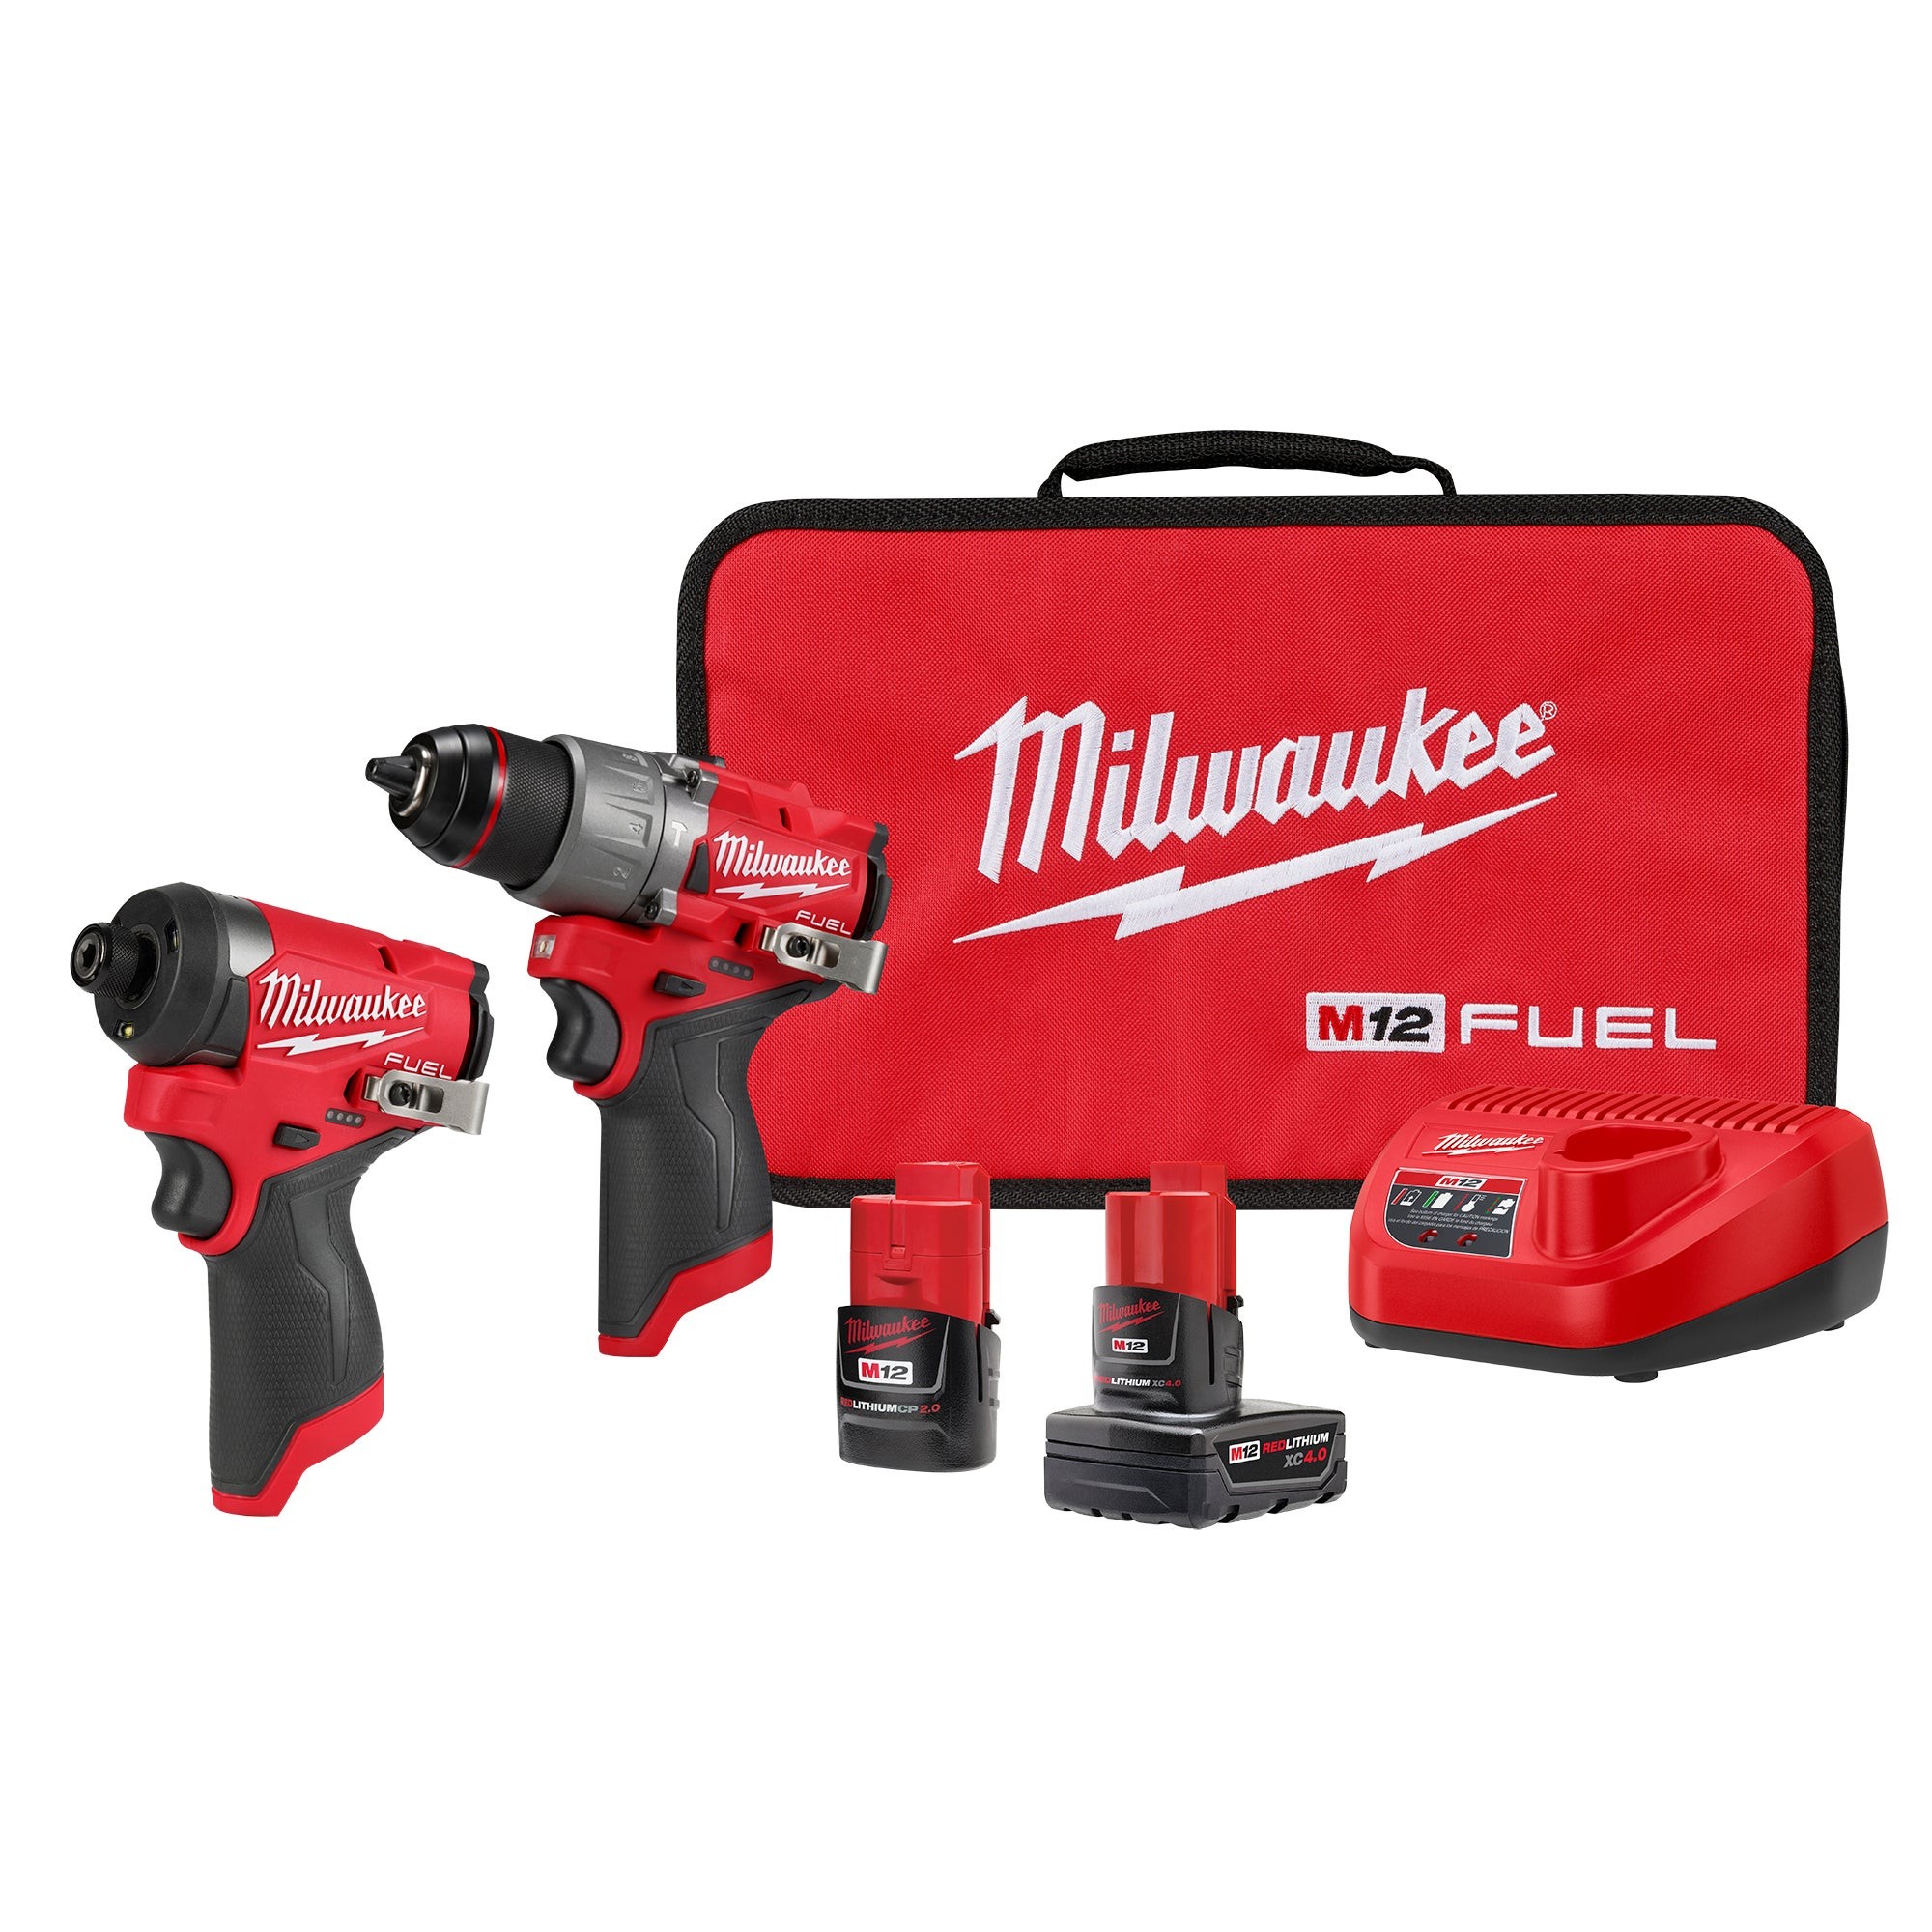 M12 FUEL 2 Tool Combo Kit - Hammer Drill & Hex Impact Driver